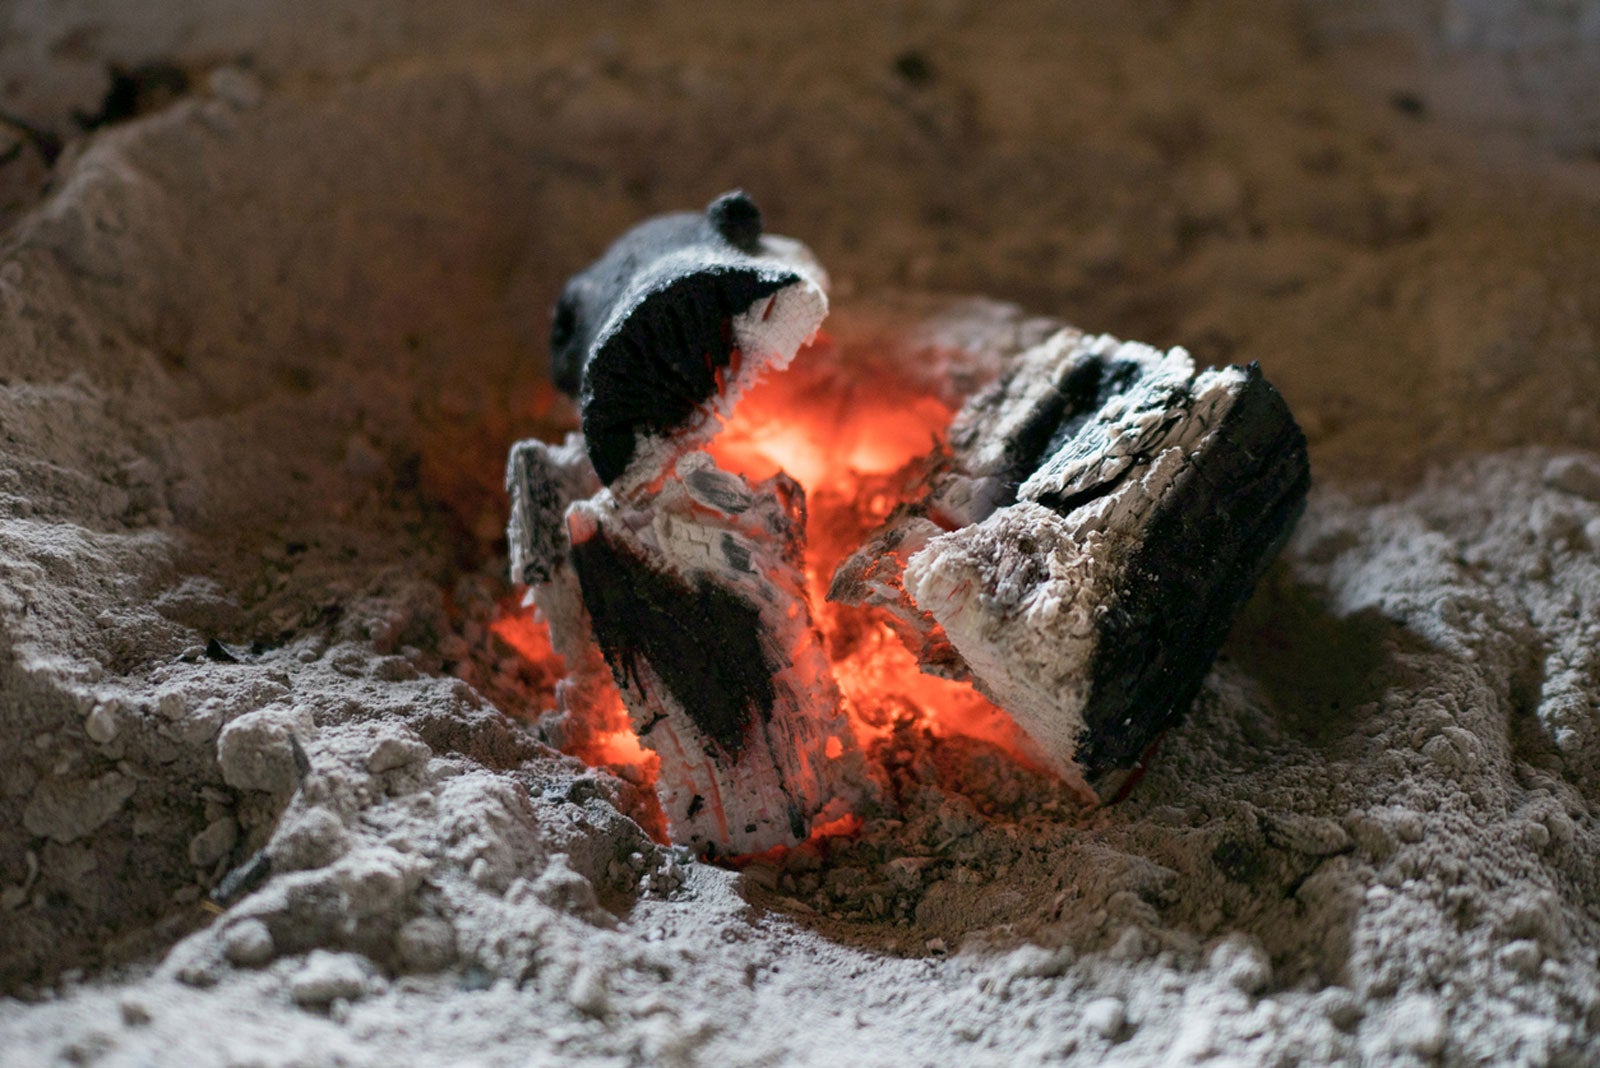 Composting Ashes Is Ash Good For Compost, How To Dispose Fire Pit Ashes